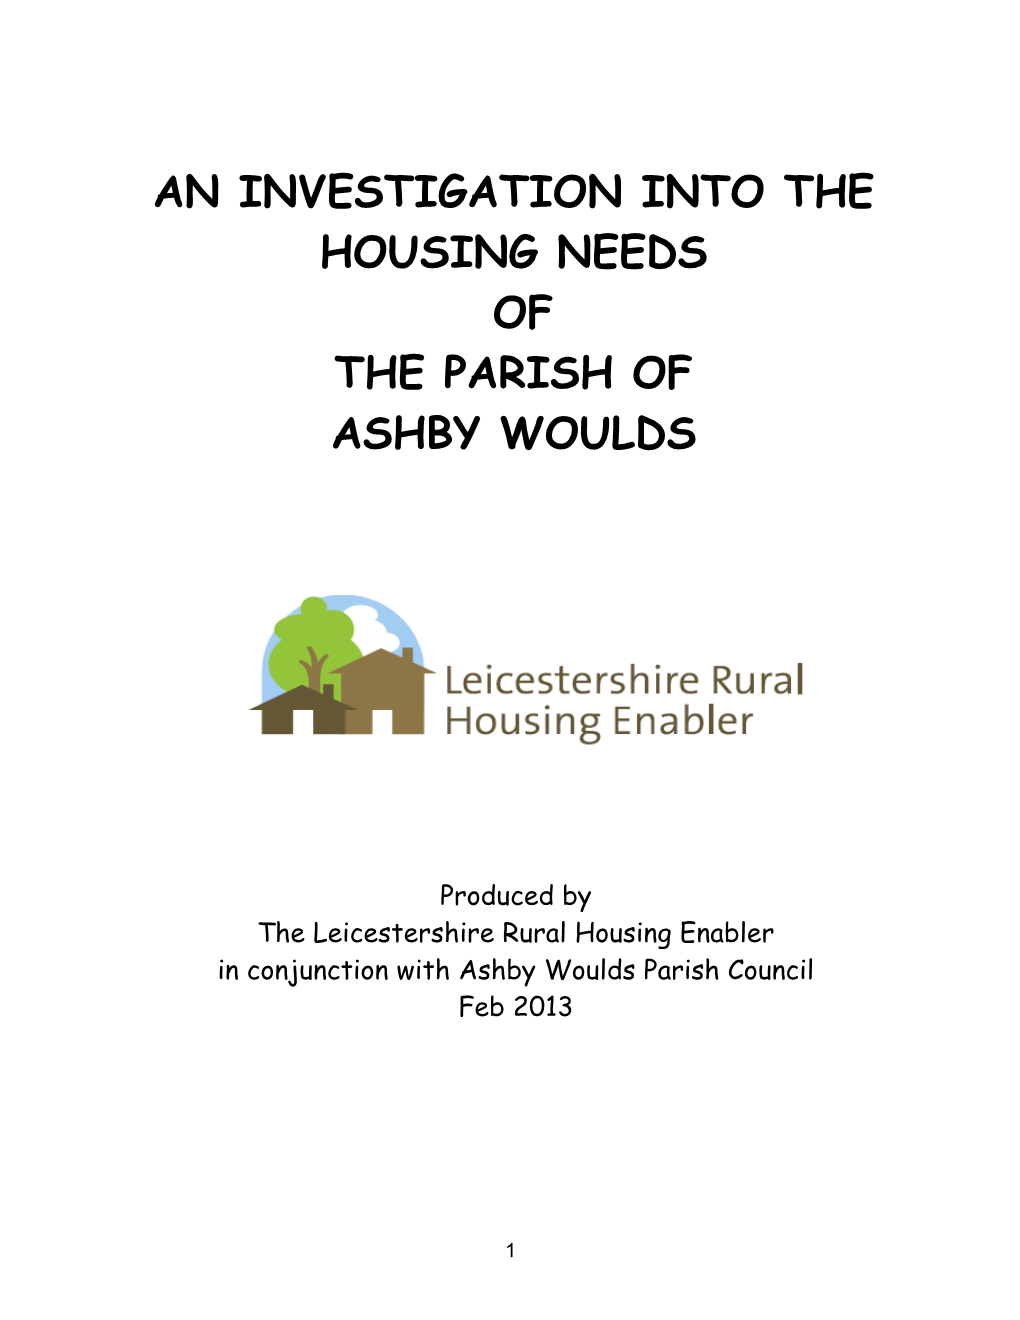 An Investigation Into the Housing Needs of the Parish of Ashby Woulds